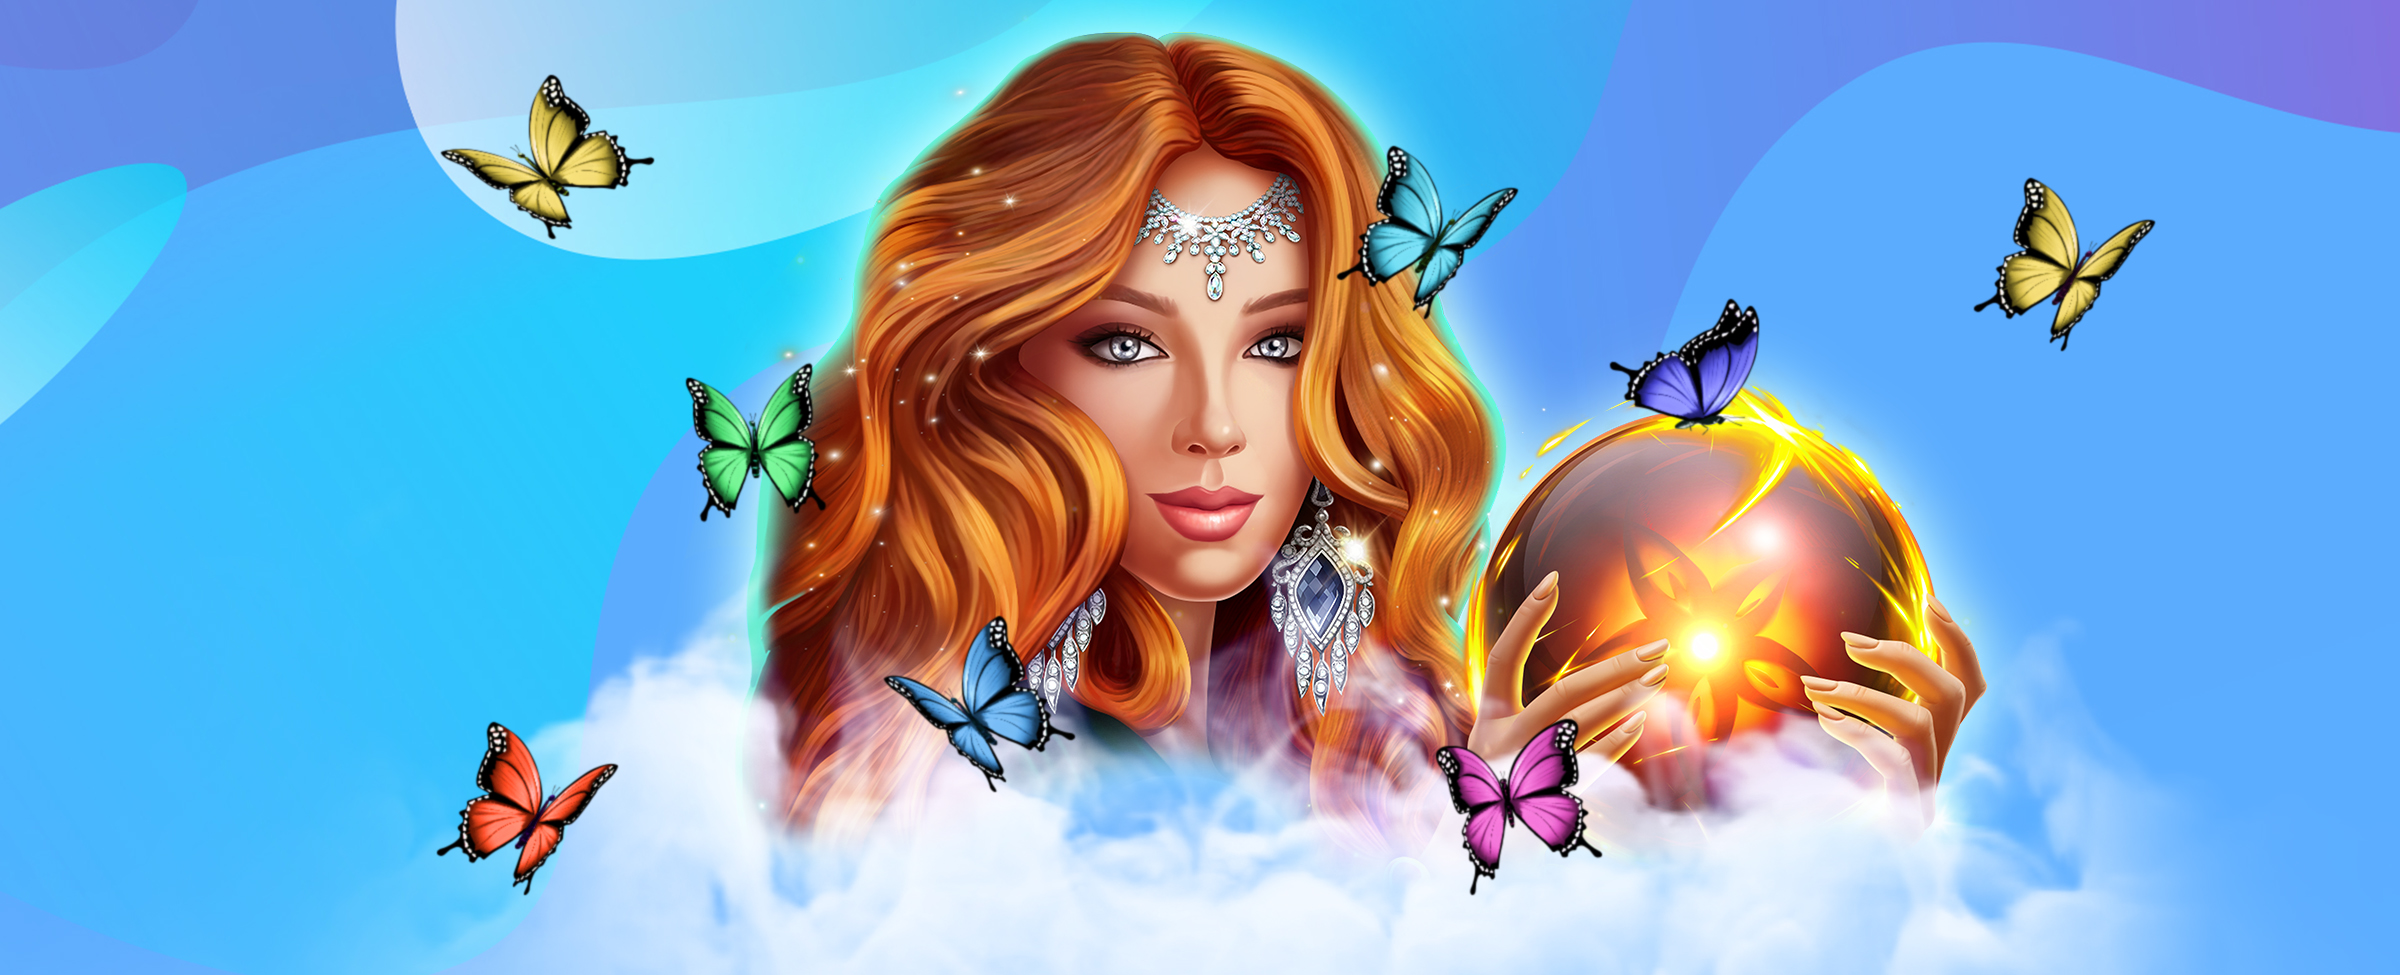 An animated woman with flowing red hair wearing a forehead chain and large earrings, holds up a glowing yellow and red ball, surrounded by colorful butterflies, from the SlotsLV slot game Lady’s Magic Charms.